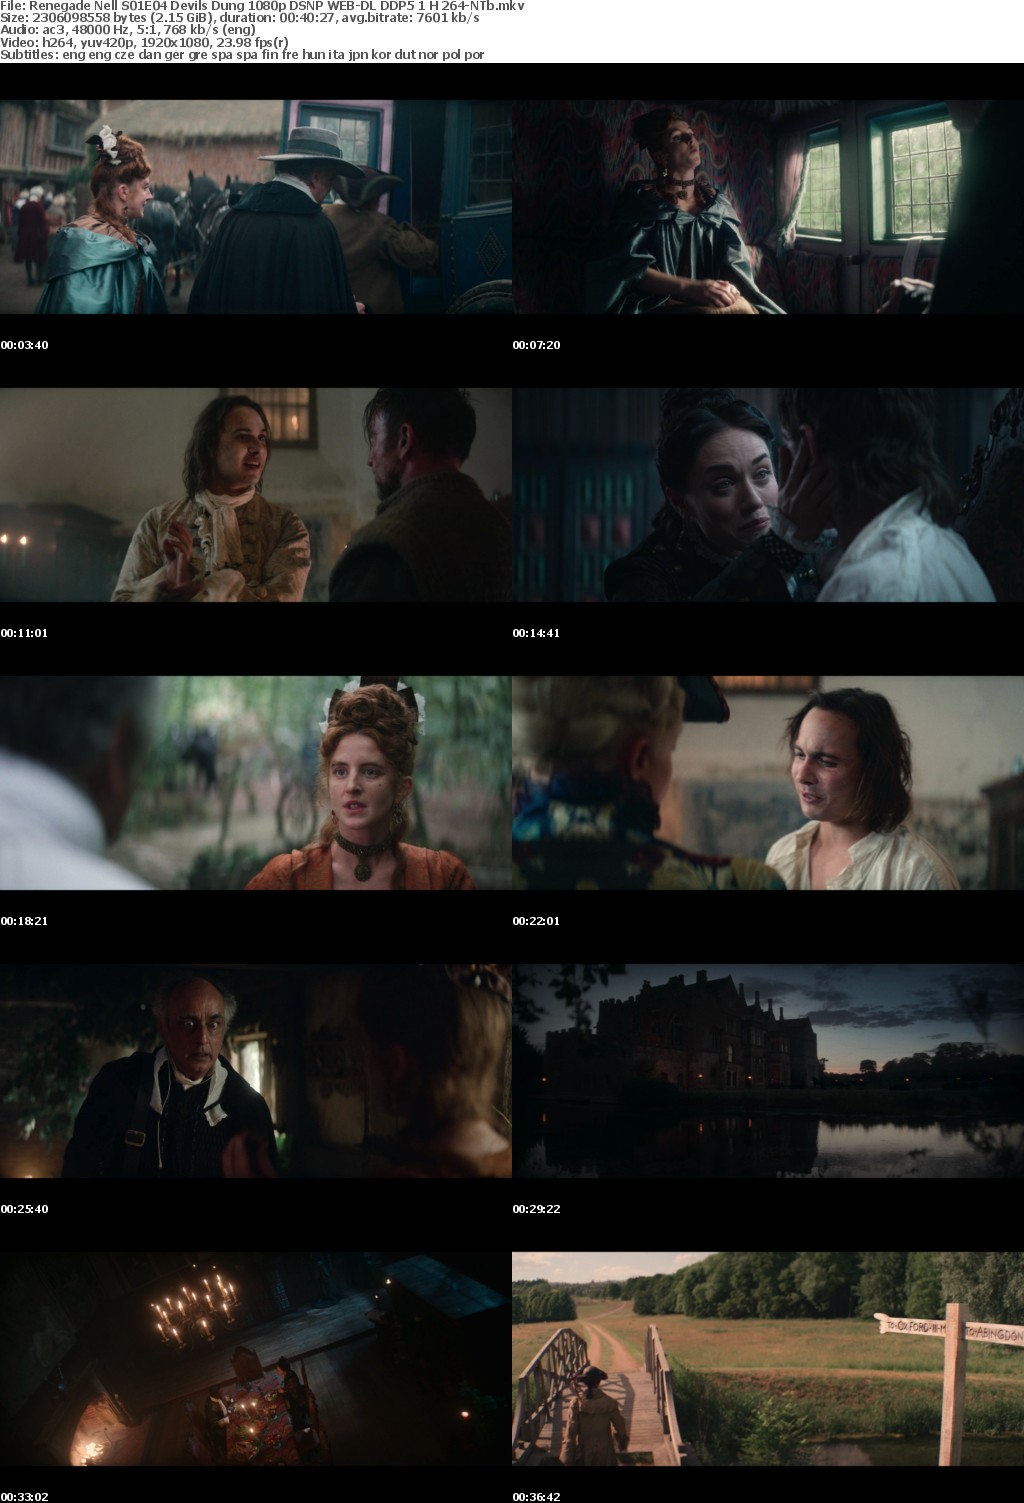 Renegade Nell S01E04 Devils Dung 1080p DSNP WEB-DL DDP5 1 H 264-NTb